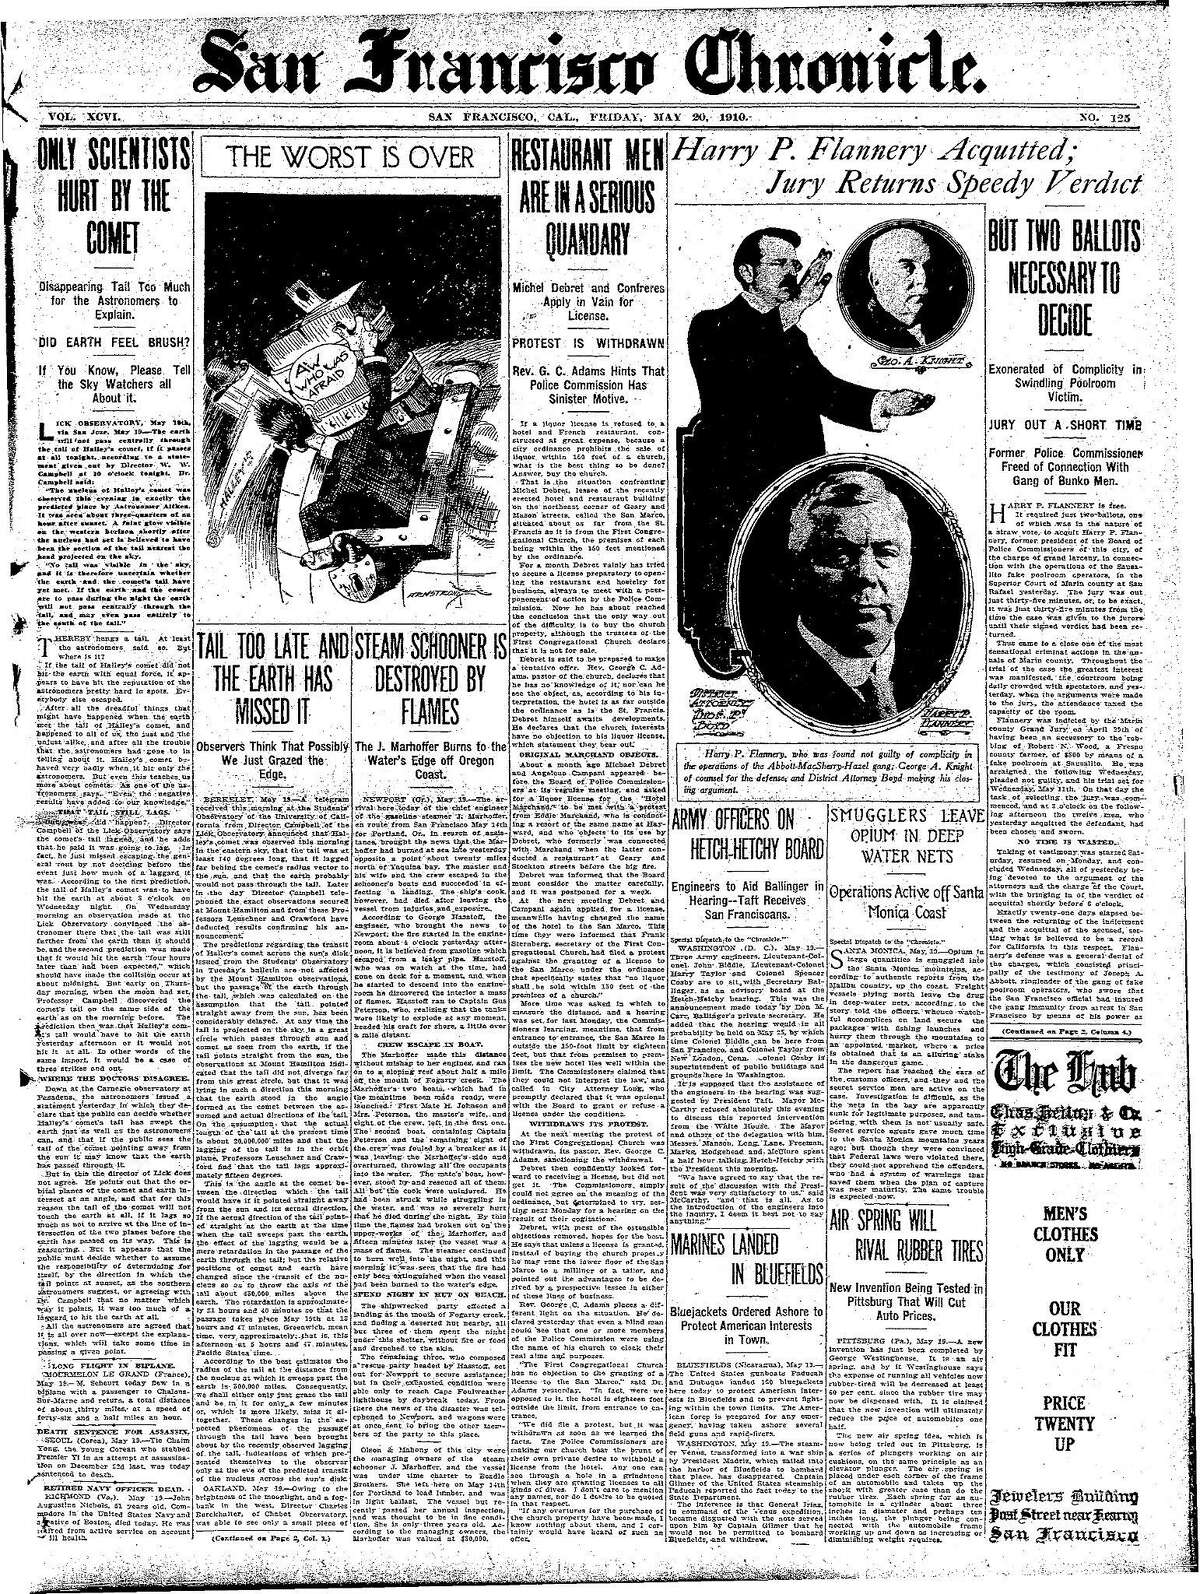 Historic Chronicle Front Page May 20, 1910 Halley's comet passes out of sight Chron365, Chroncover